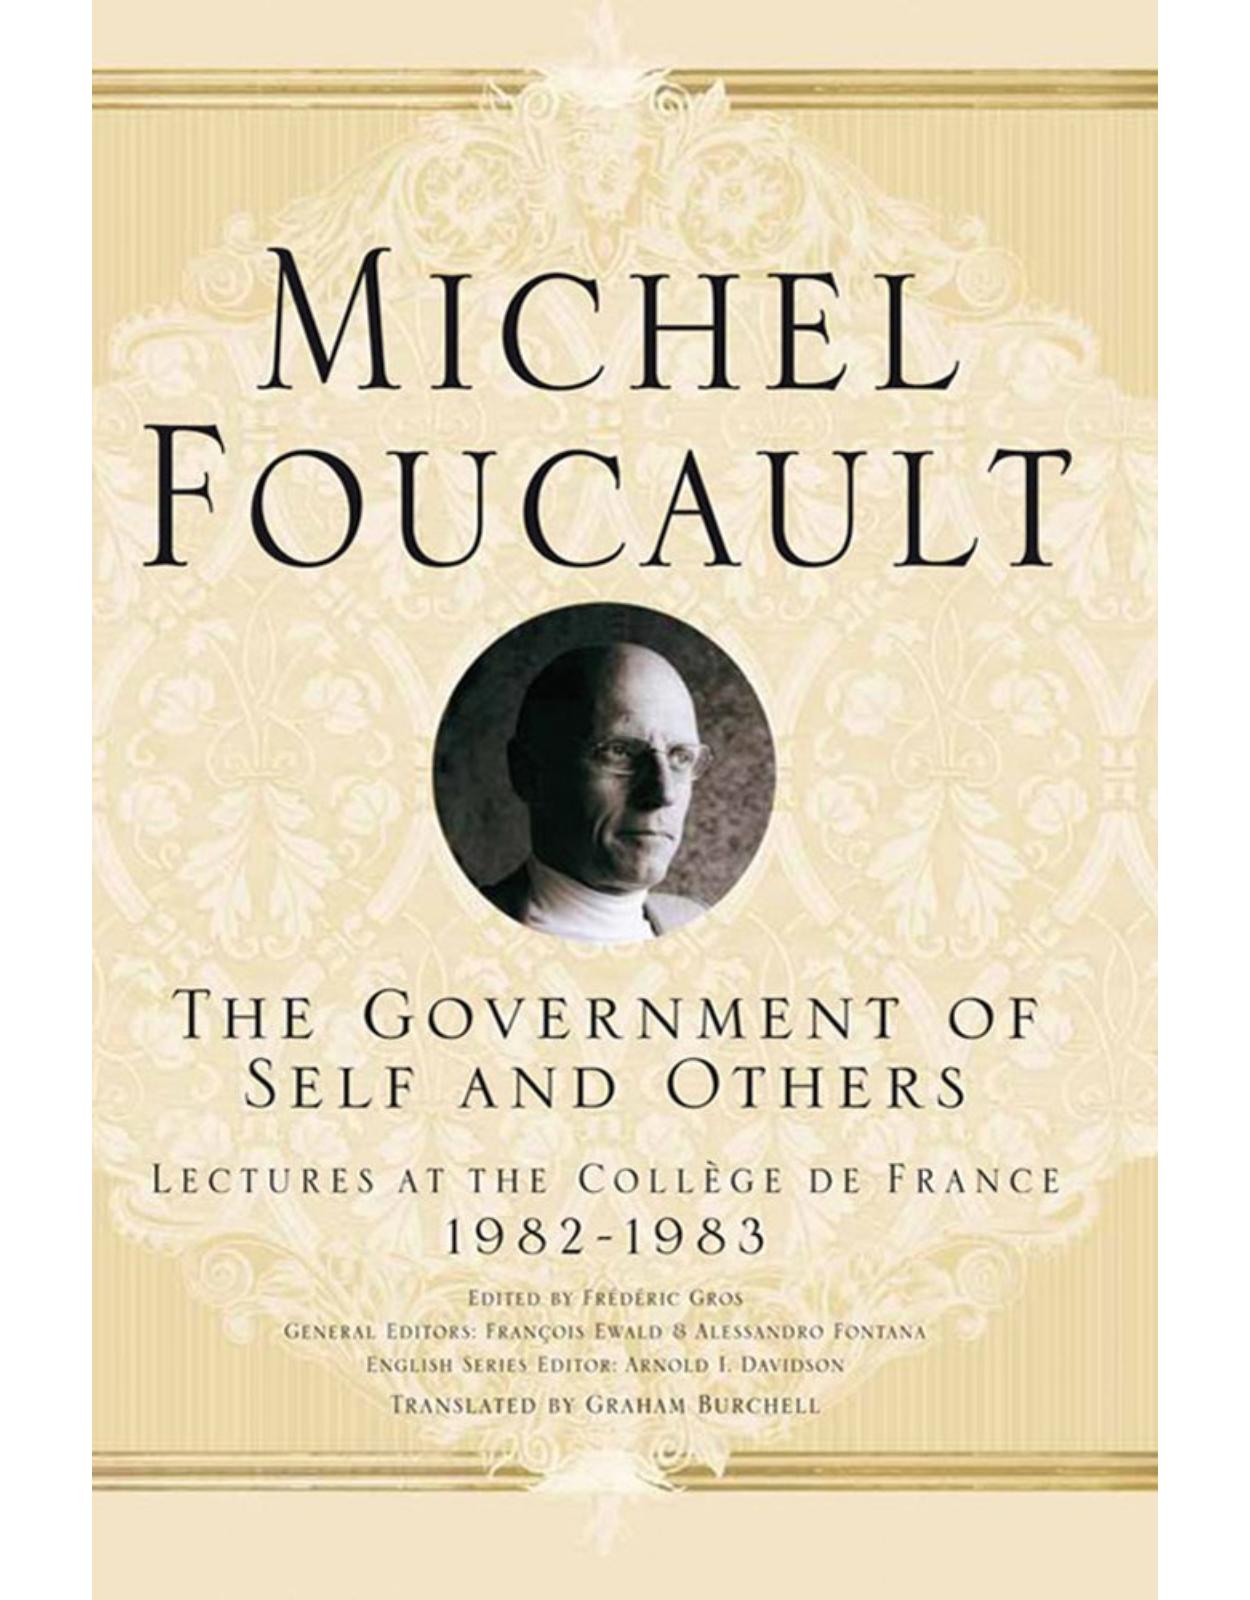 The Government of Self and Others: Lectures at the College de France, 1982-1983 (Michel Foucault: Lectures at the College De France)